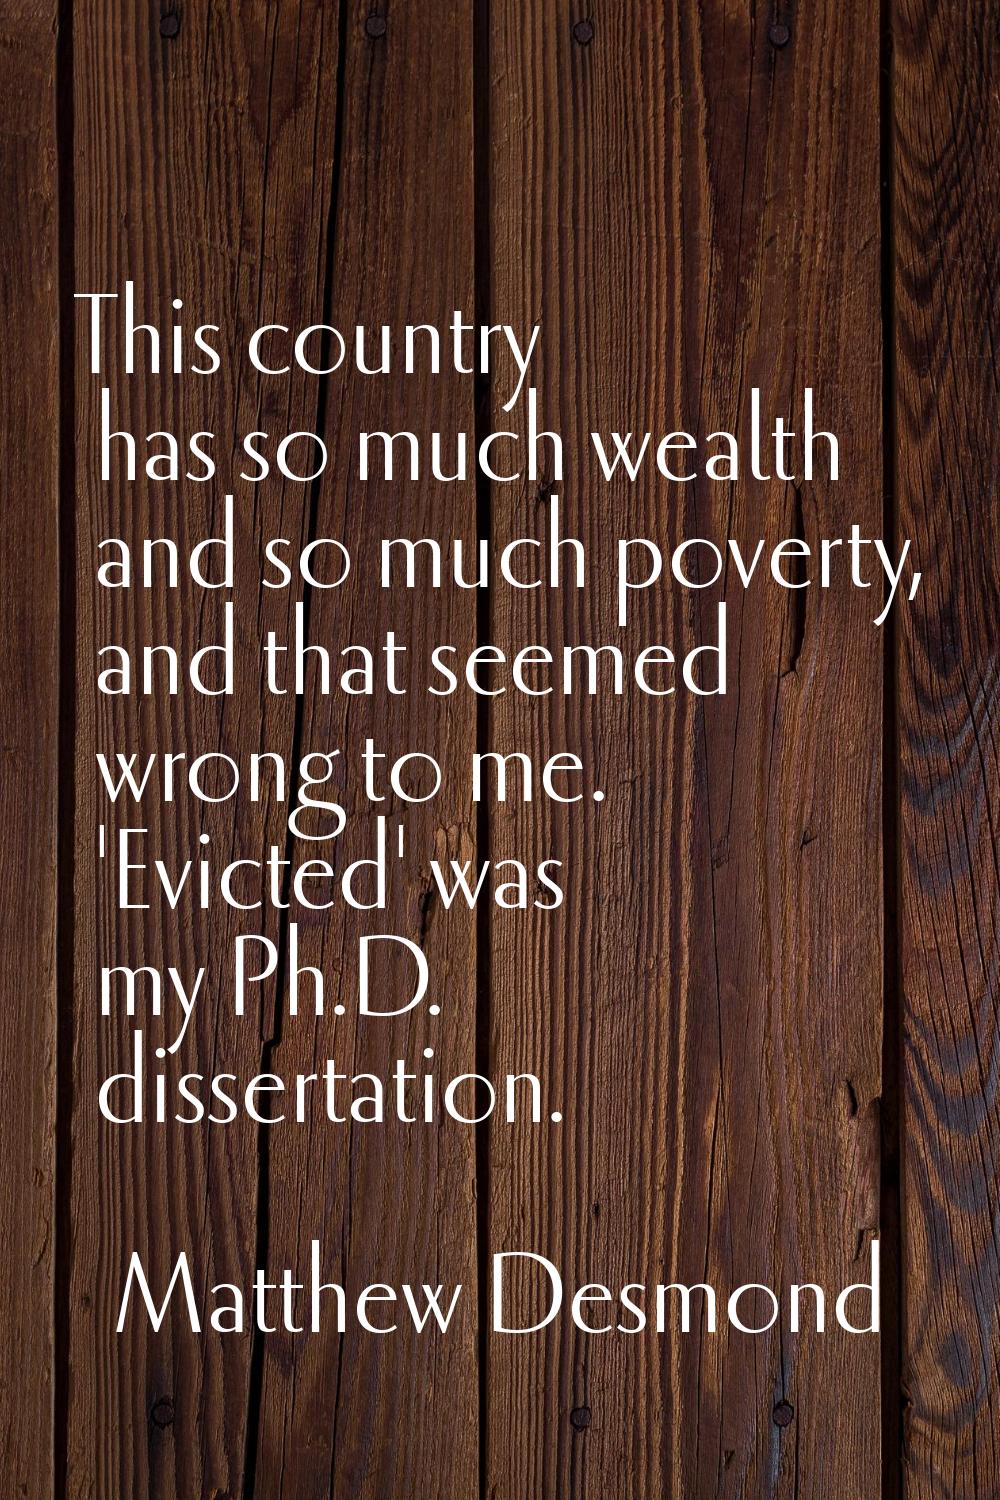 This country has so much wealth and so much poverty, and that seemed wrong to me. 'Evicted' was my 